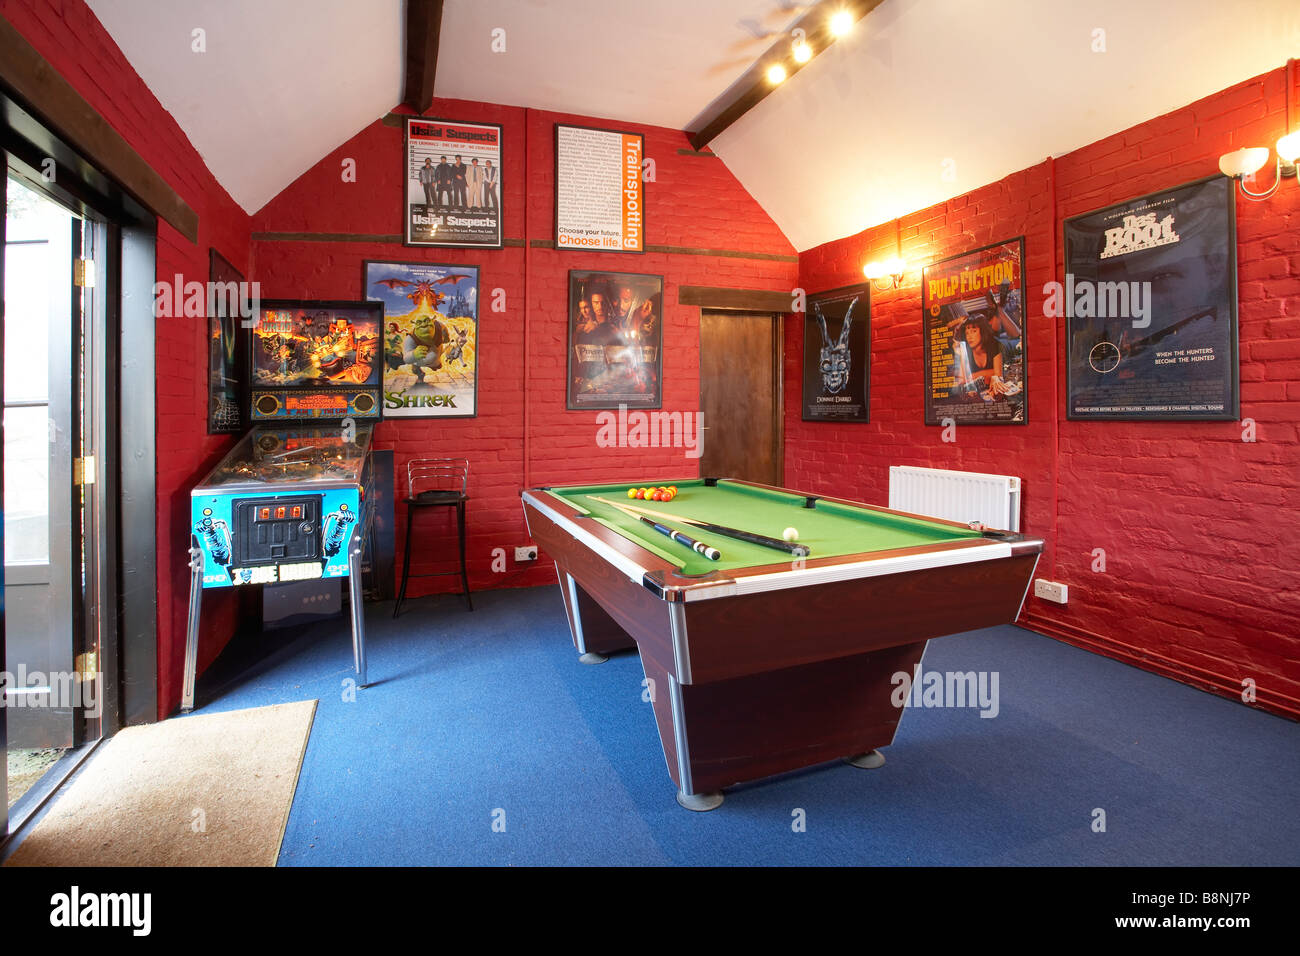 Games room interior red pool table pinball machine film posters Stock Photo  - Alamy